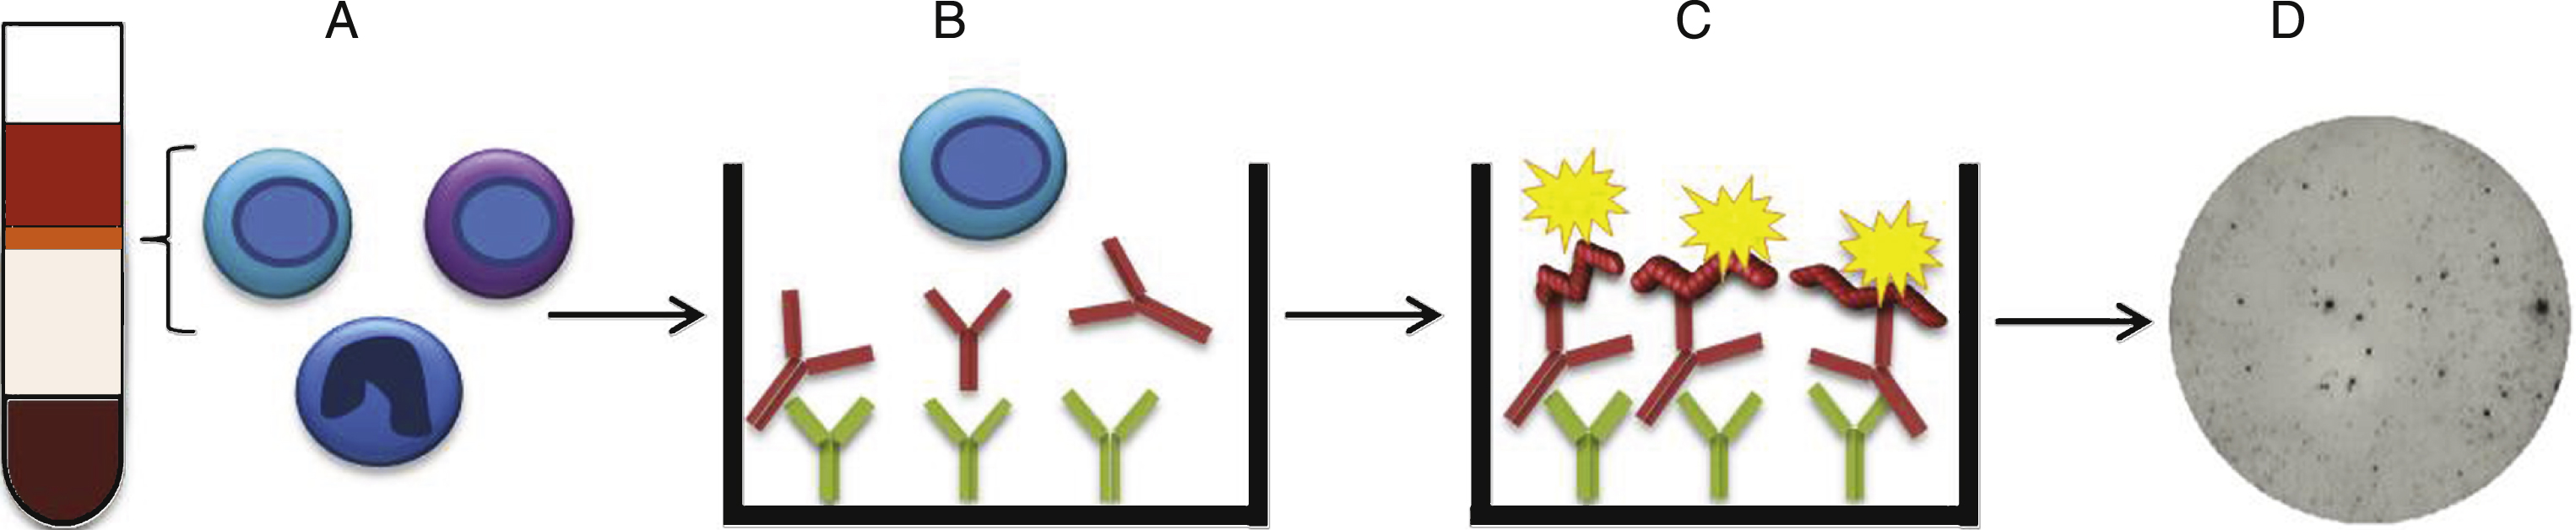 B cell ELISpot. A) PBMCs were collected by Ficoll-Paque separation, stimulated with R848 and hIL-2 to start their antibody production and B) added to ELISpot wells coated with anti-IgG capture antibodies. C) Biotinylated Aβ binds to the captured anti-Aβ antibodies secreted from the activated B cells. D) The dots representing cells secreting anti-Aβ antibodies were visualized by Streptavidin-ALP.